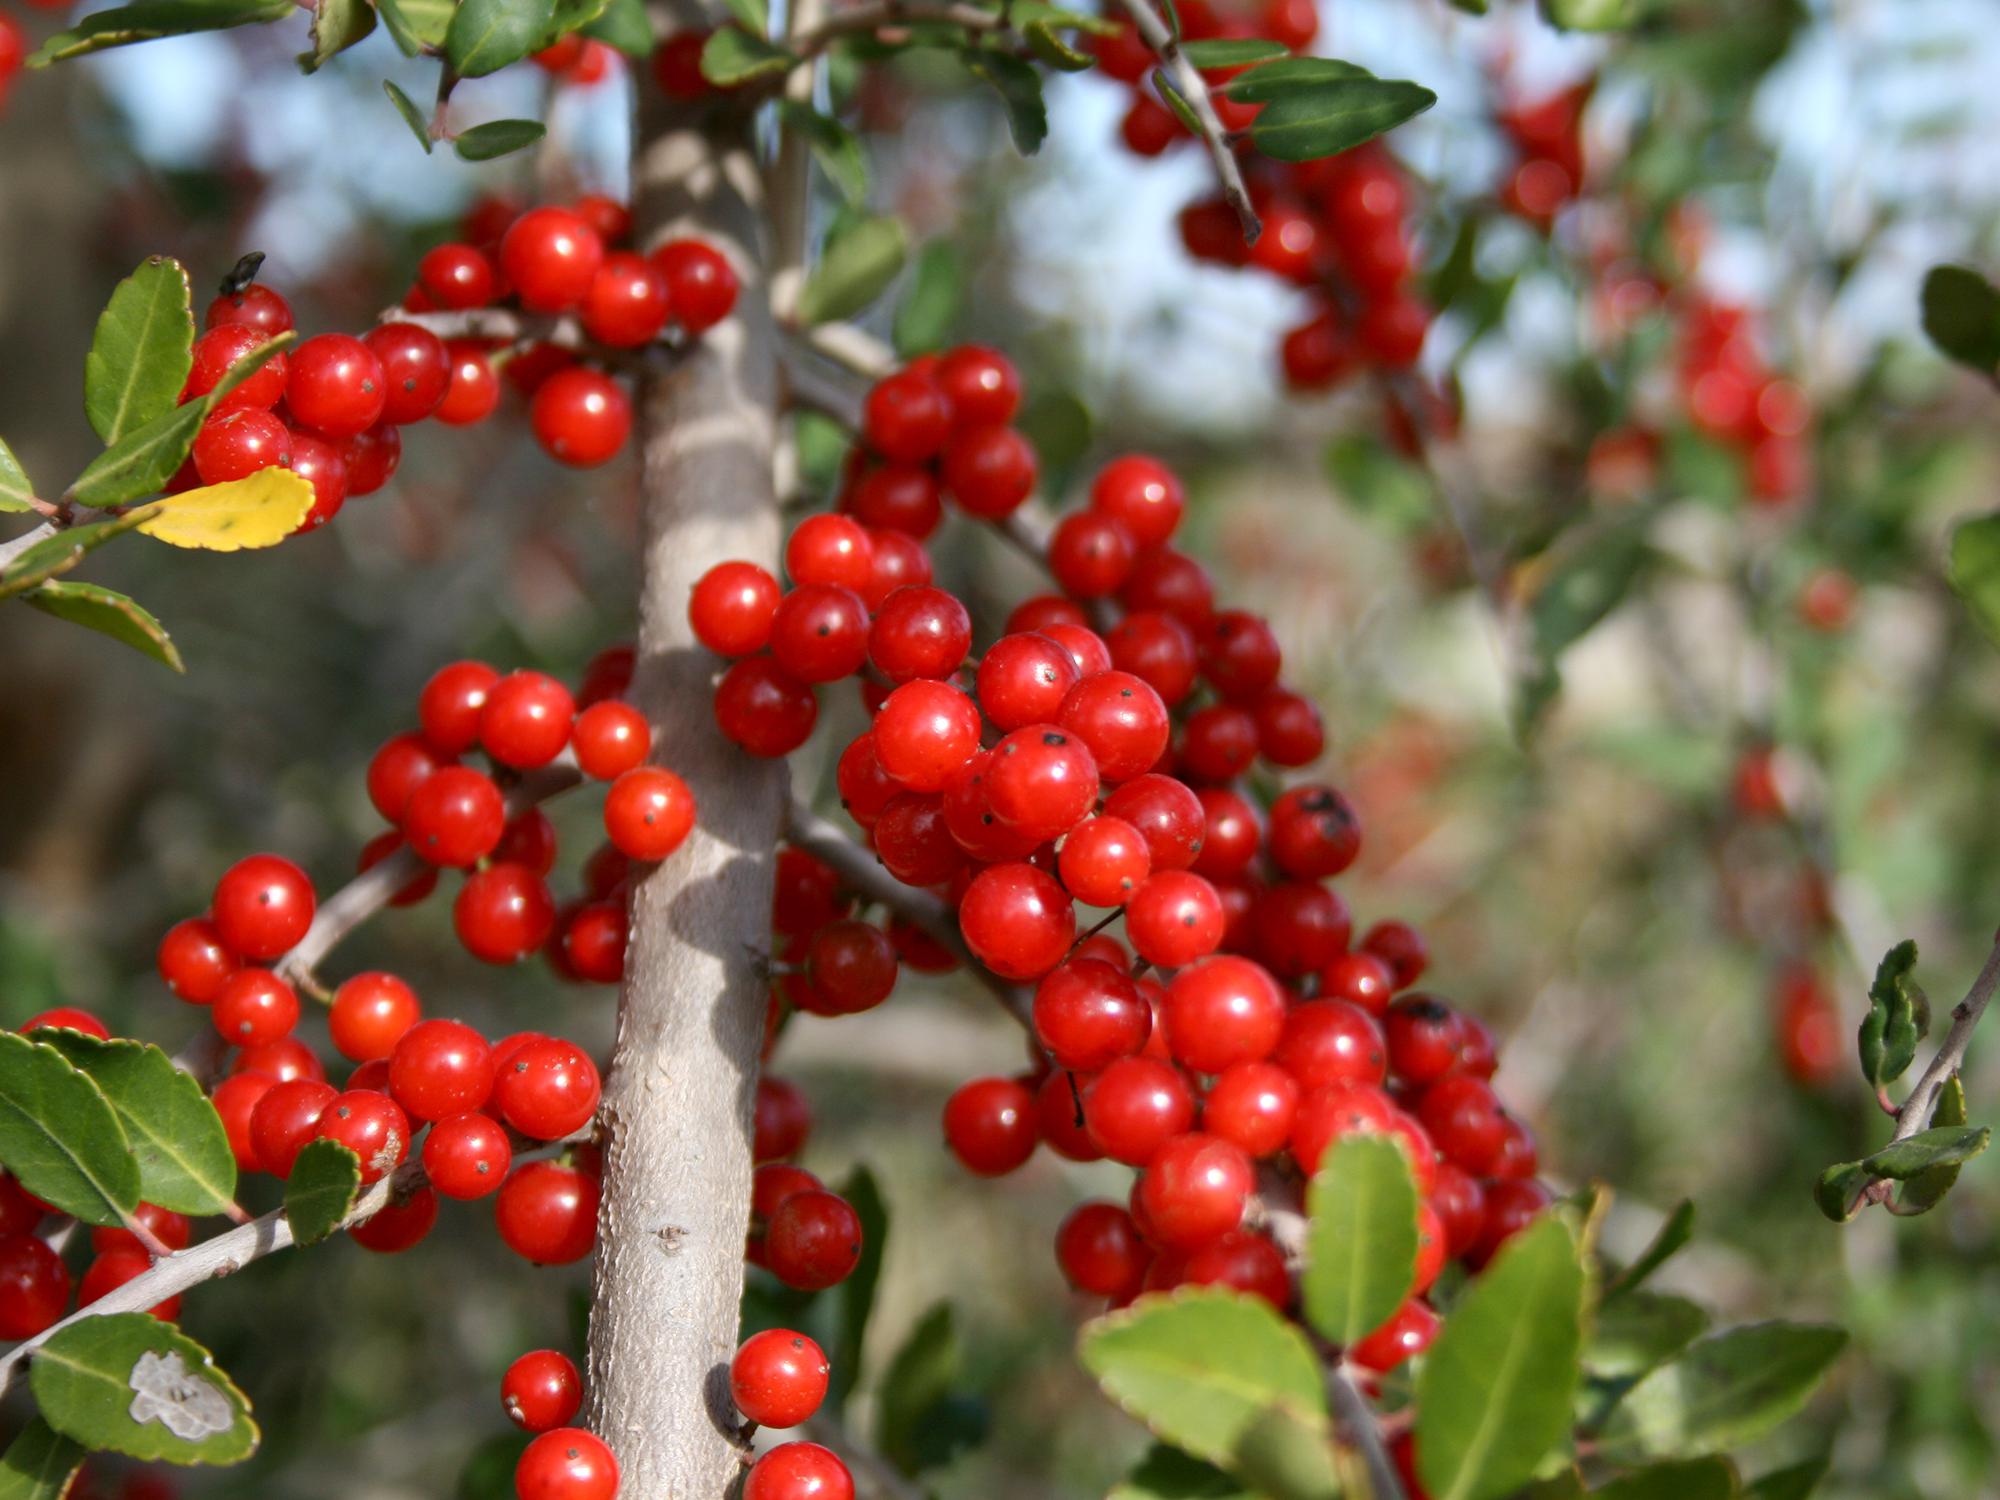 The Mississippi native yaupon holly can be seen popping out of woodland edges everywhere. Its distinctive berries have a translucent quality that imparts a gem-like appearance. (Photo by MSU Extension/Gary Bachman)